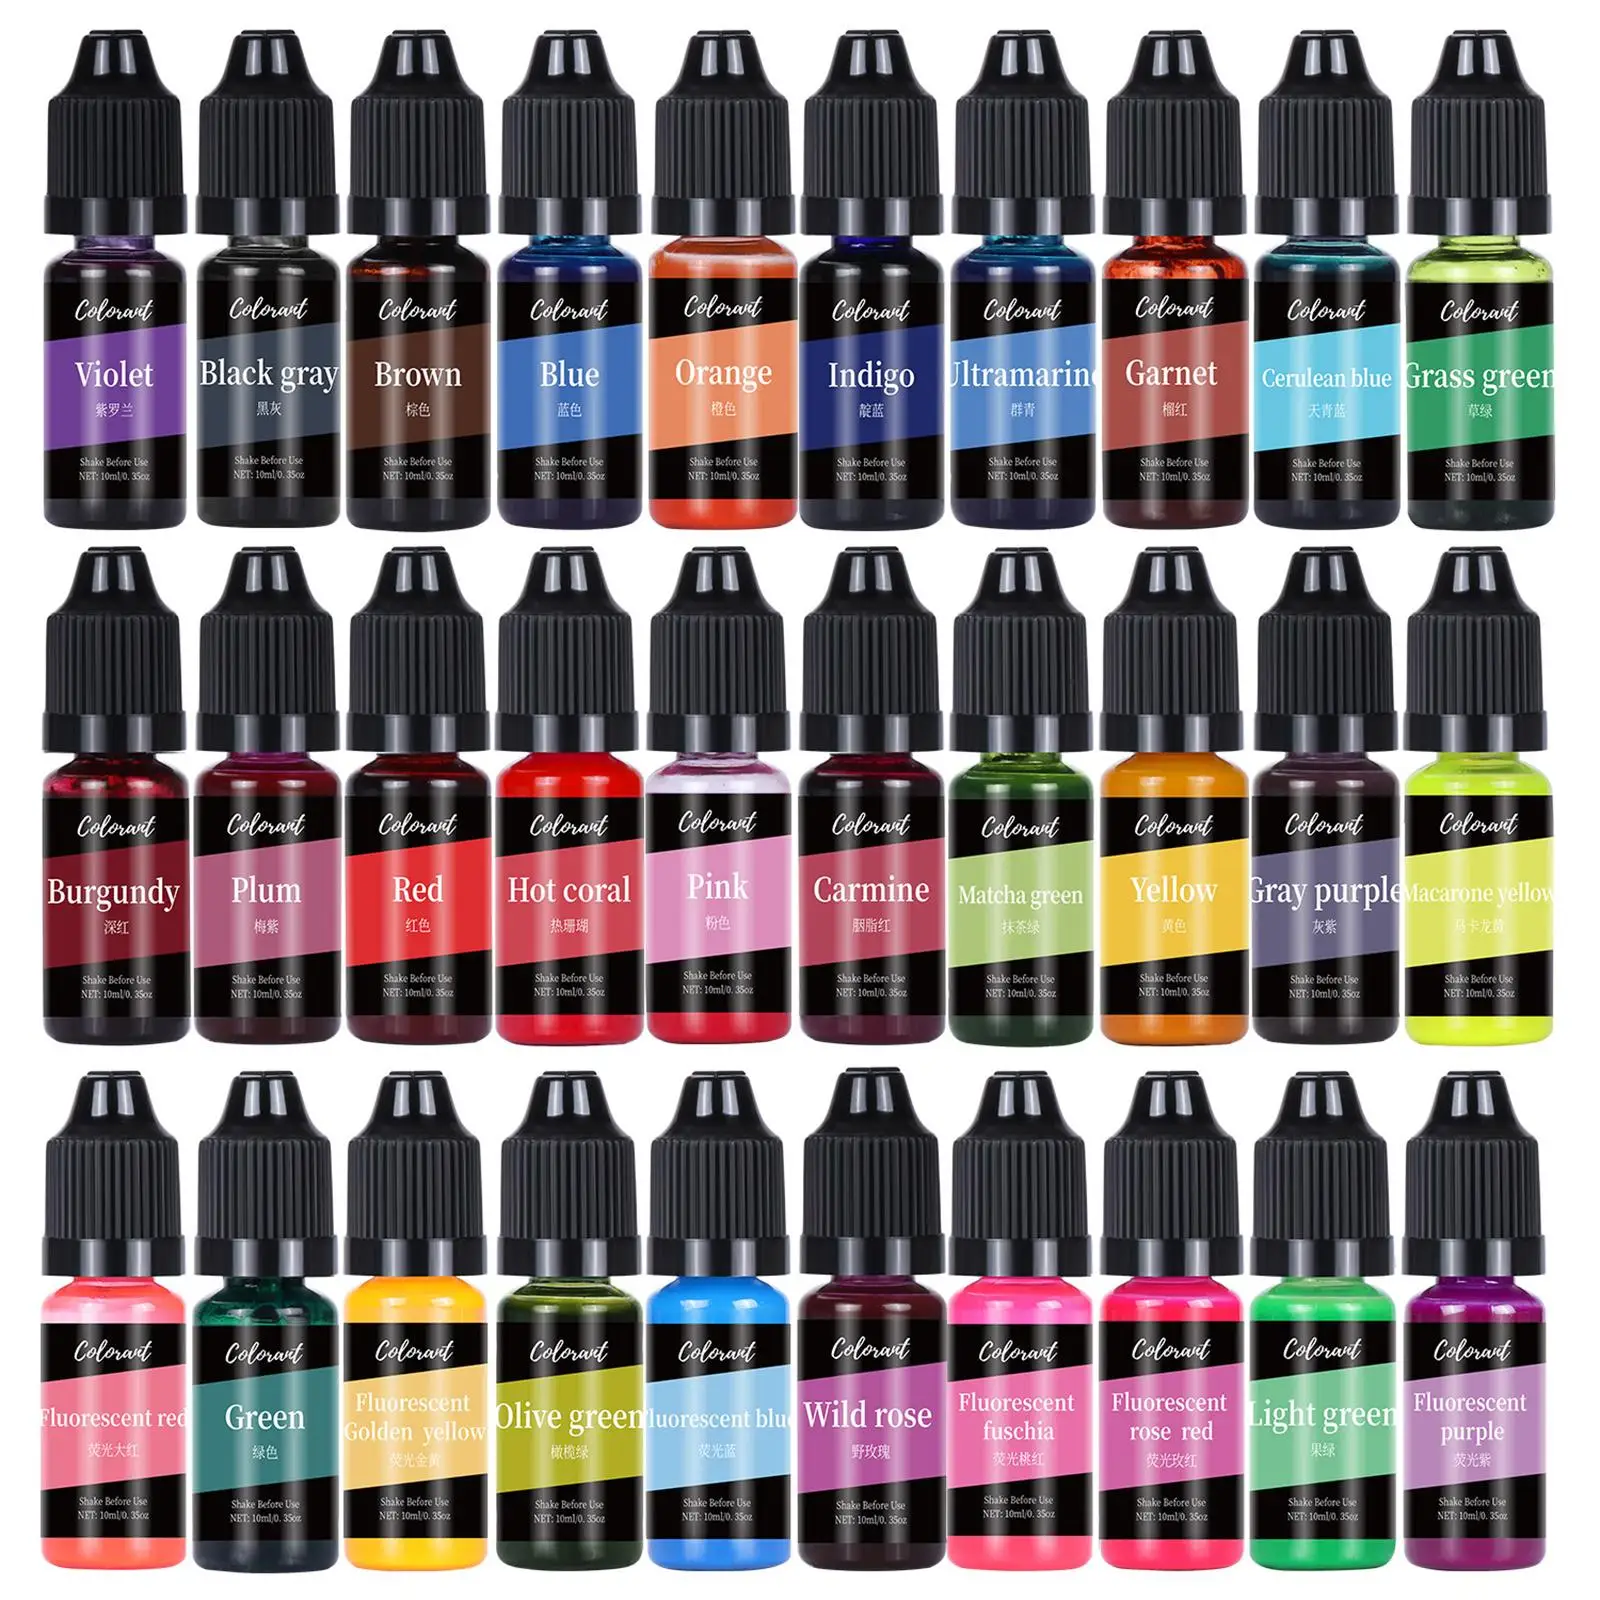 30x Candle Dye Liquid, Candle Coloring DIY Soap Making, Candle Color Dye 10ml